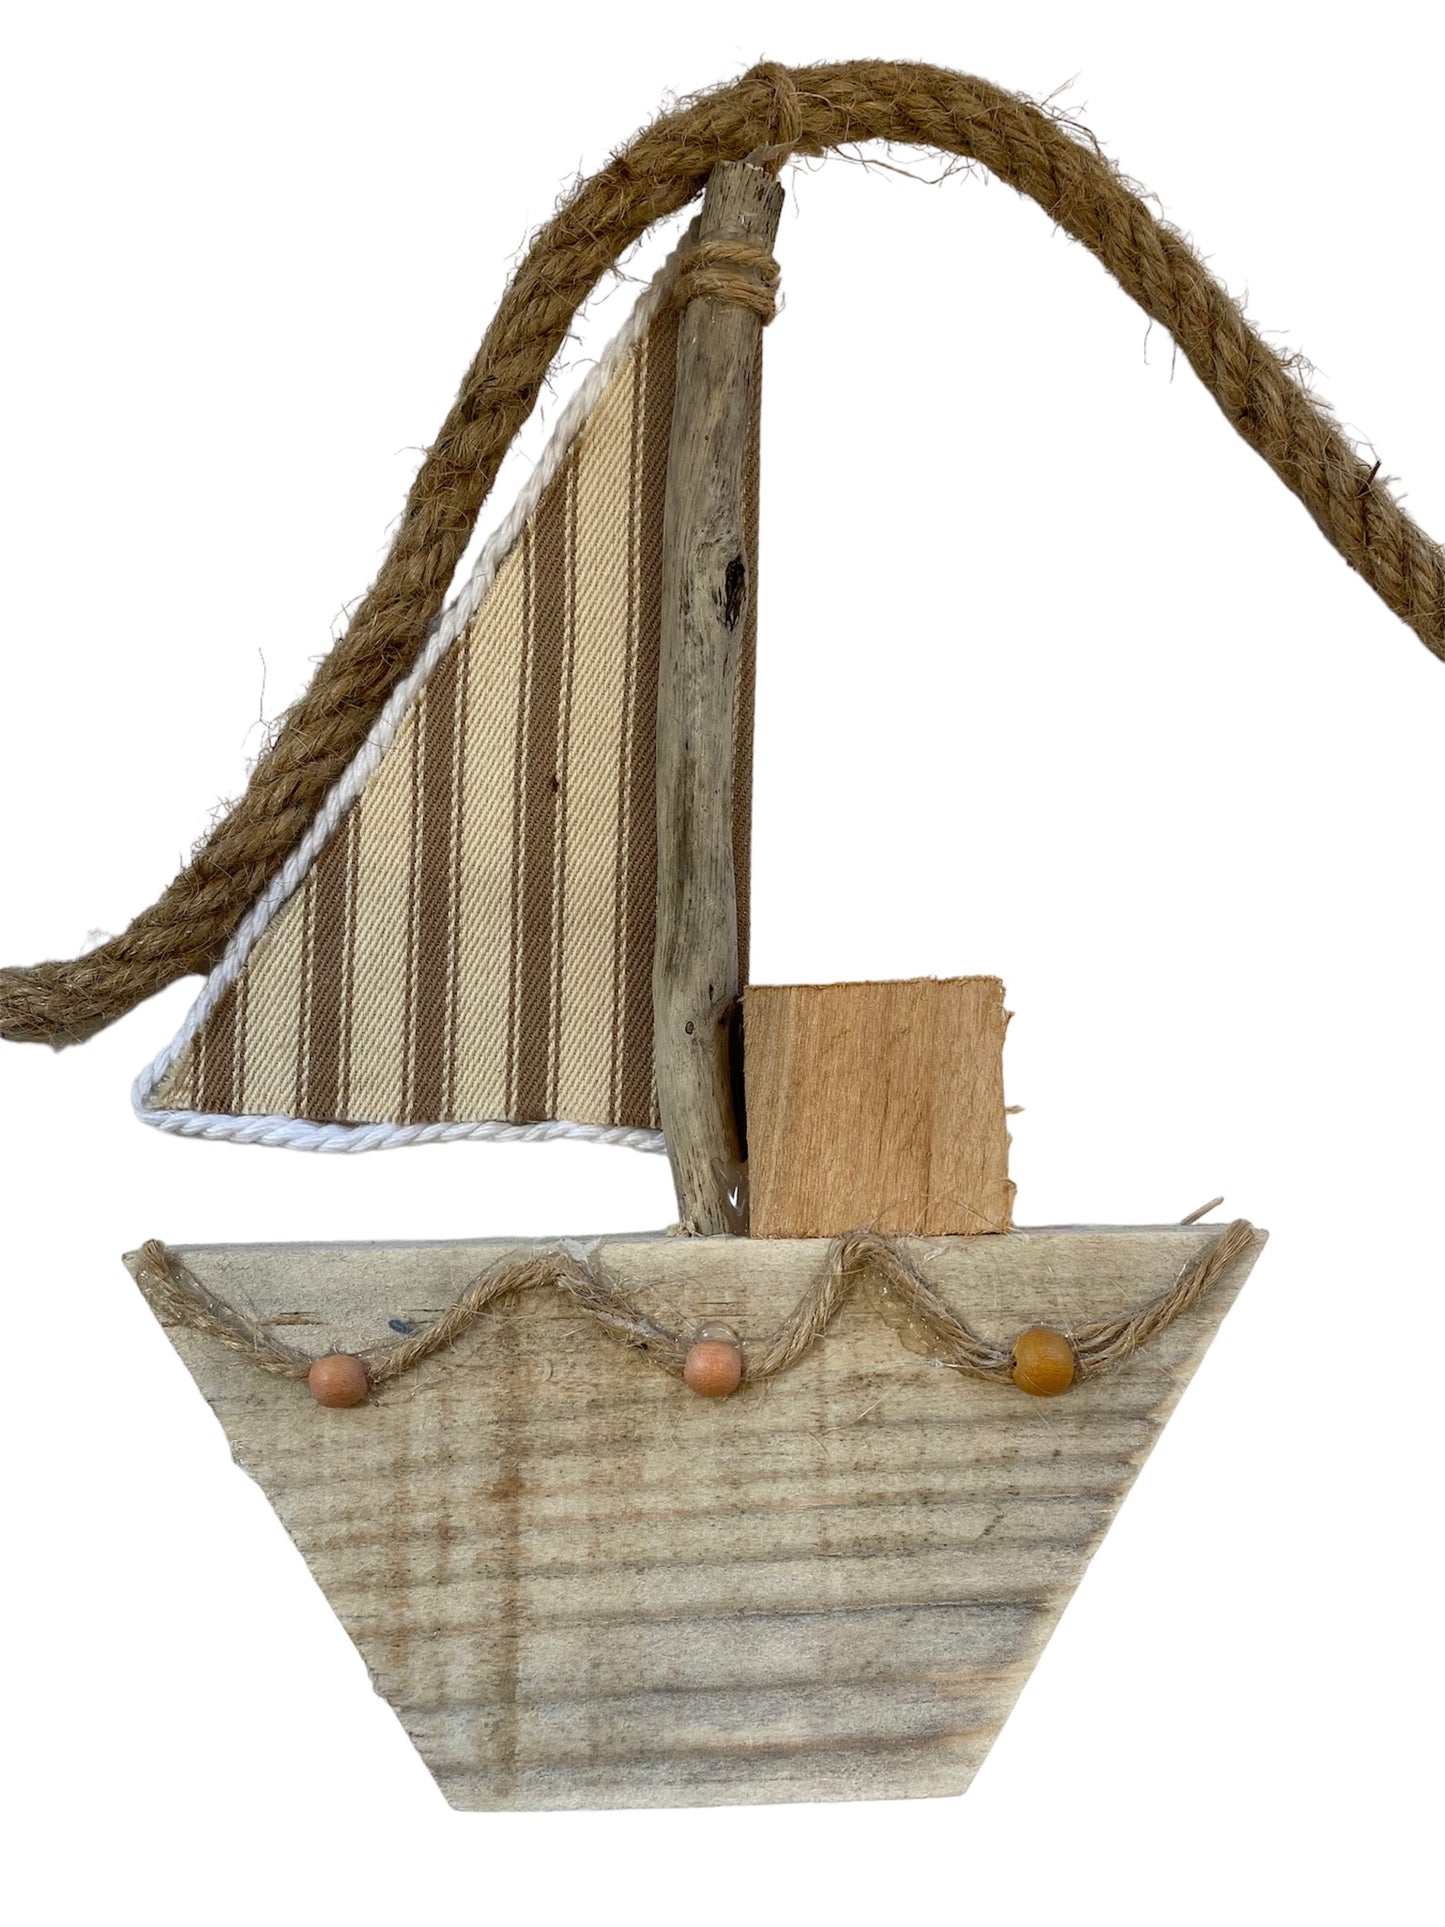 Driftwood Boat Bunting (Striped Sails)